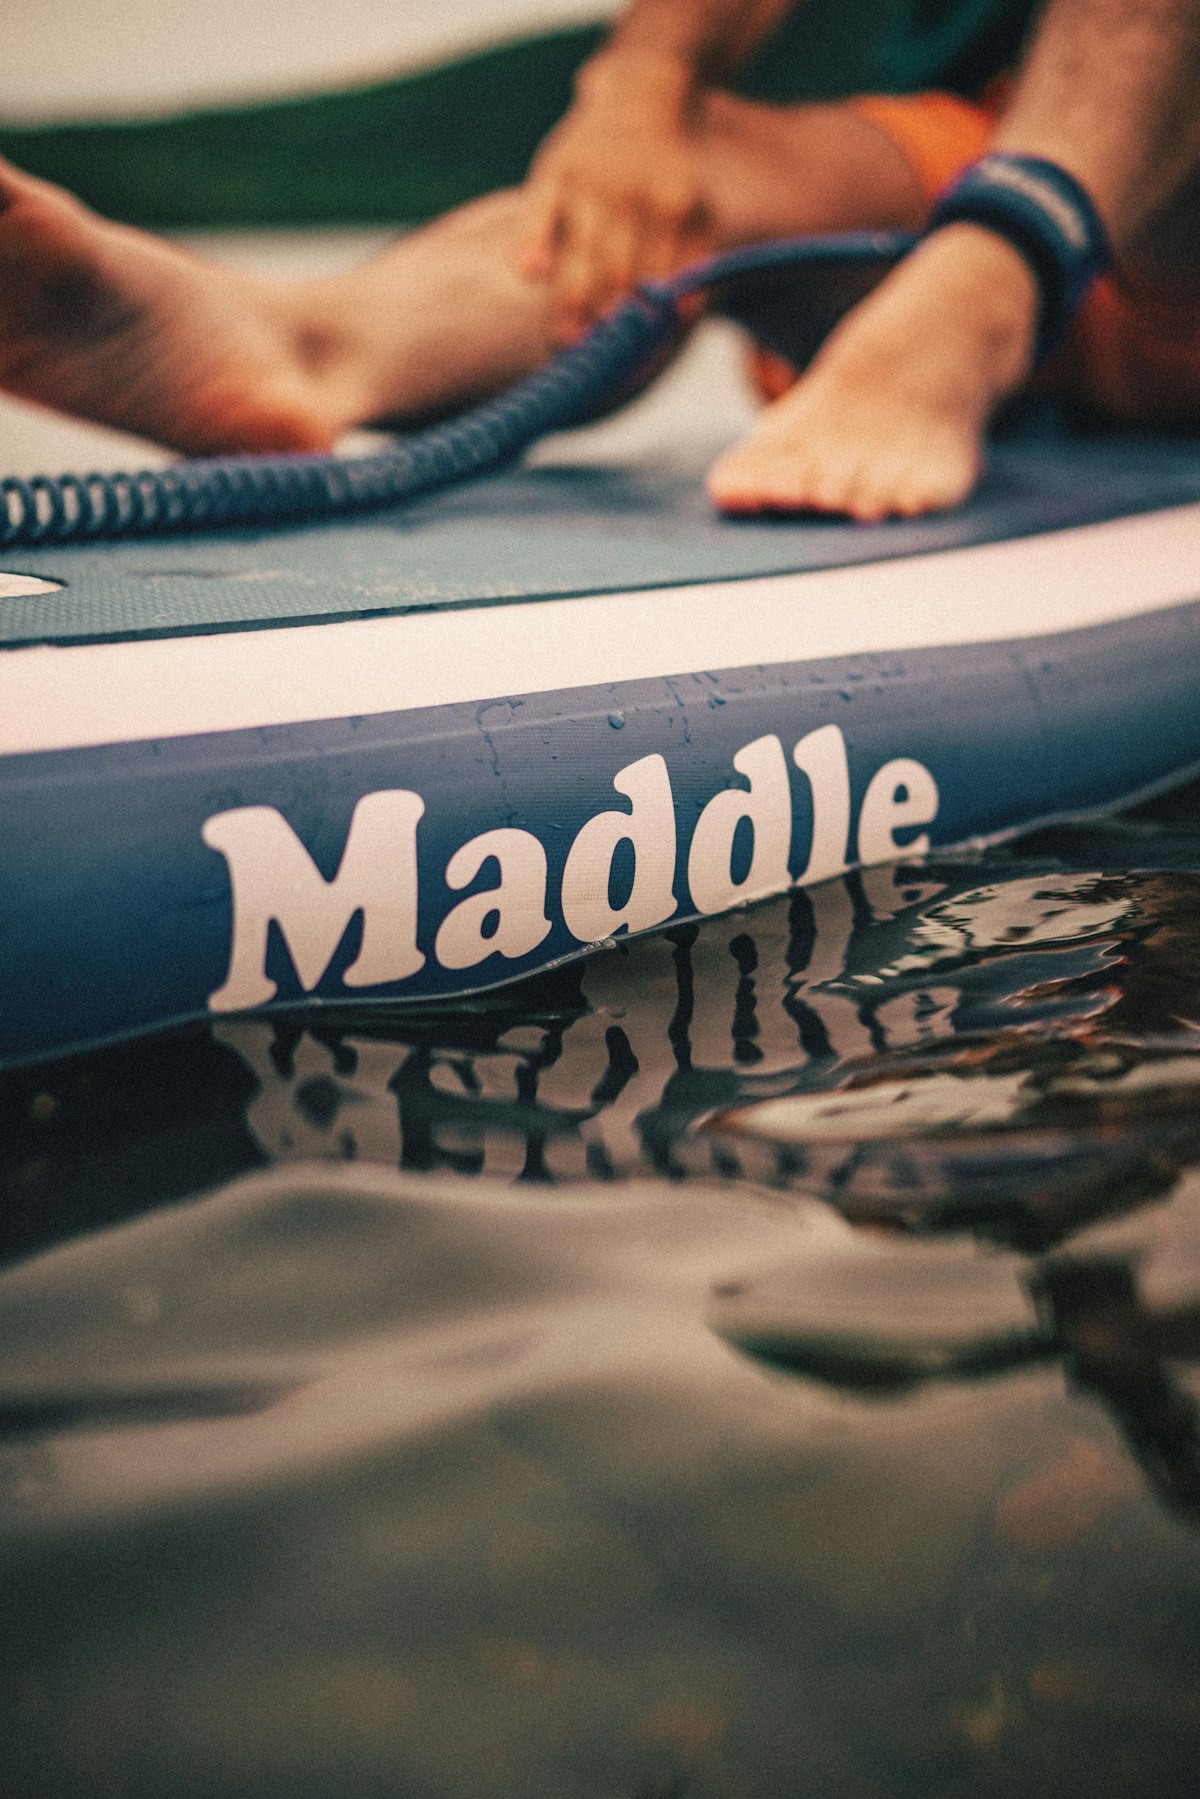 Is Paddleboarding Hard to Learn?